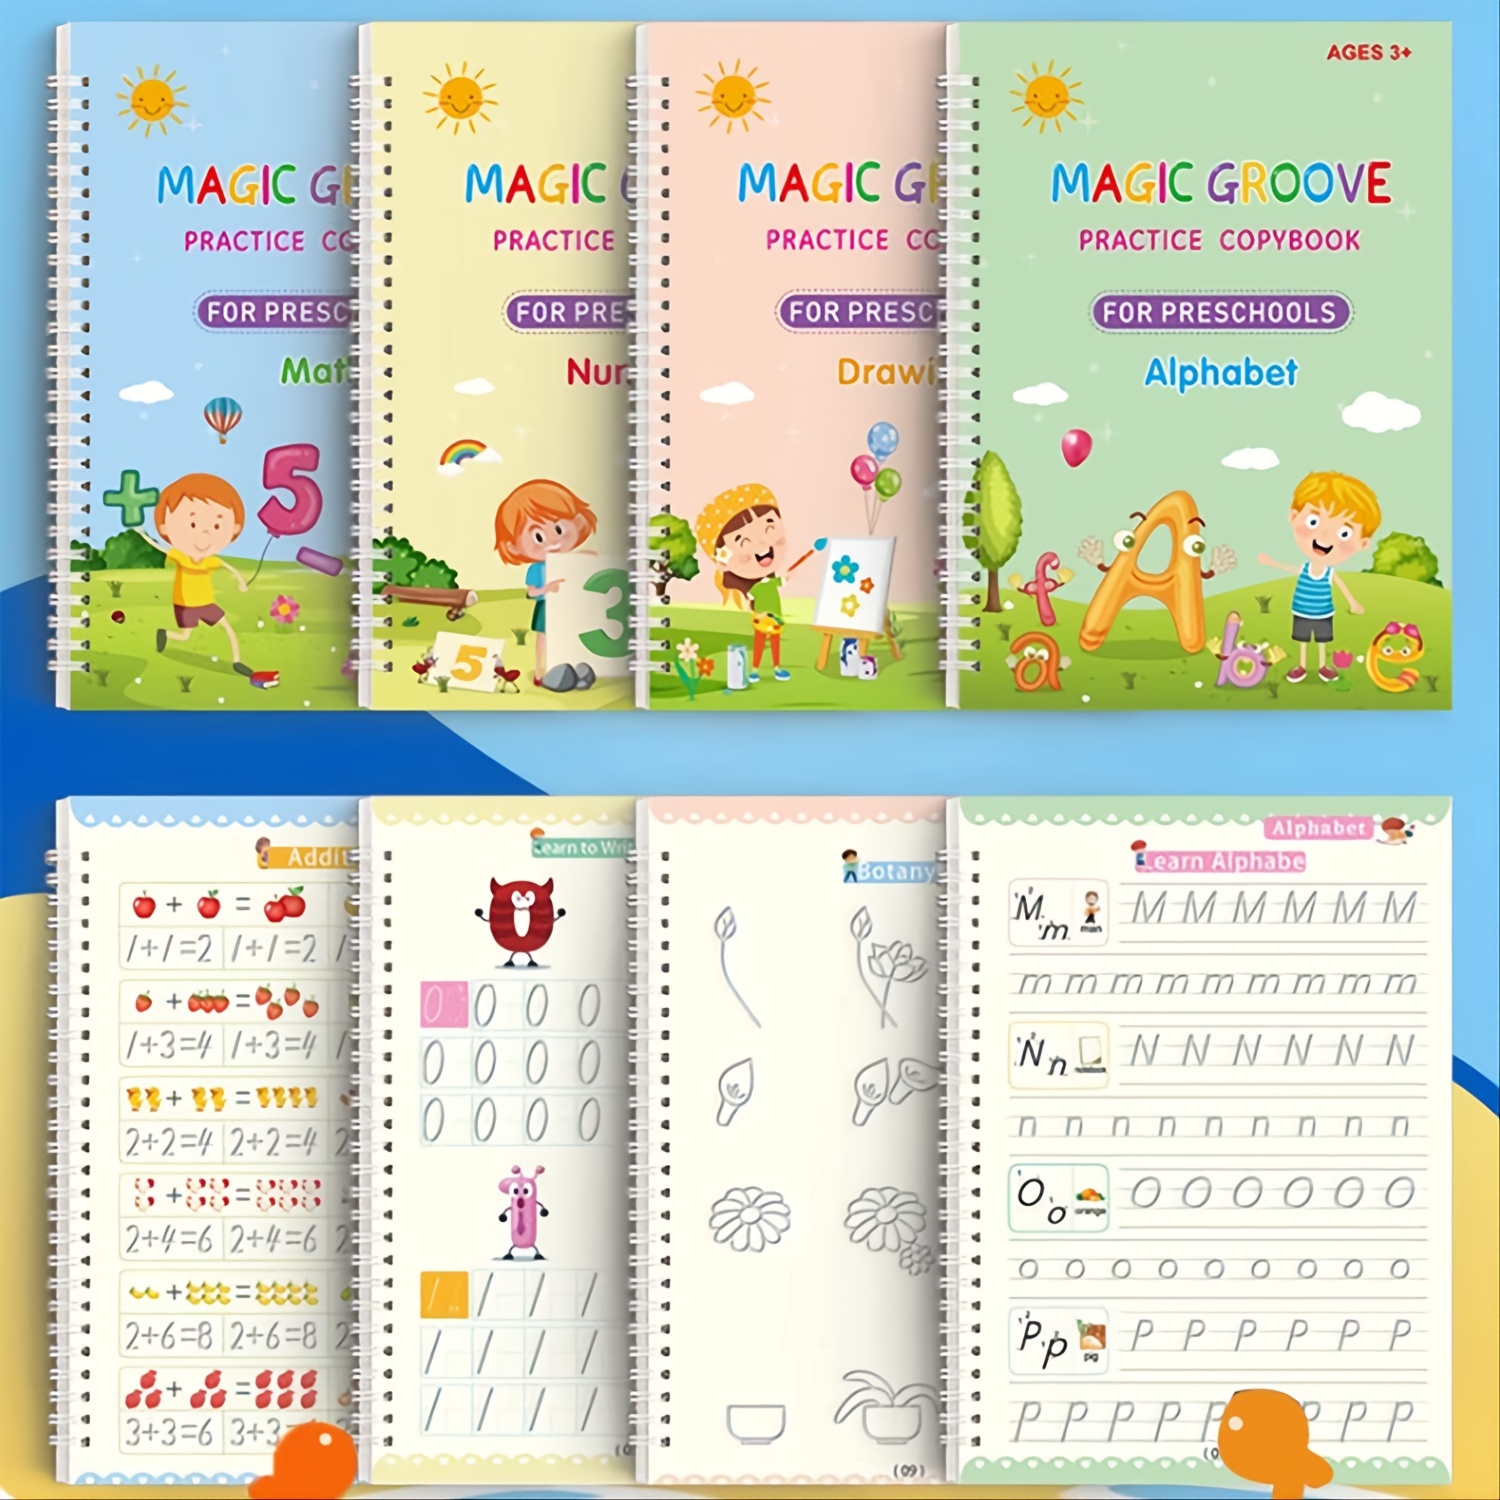 Groove Copybook for Calligraphy Books for Kids Word Children's Book Handwriting  Children Writing Learning English Practice Book